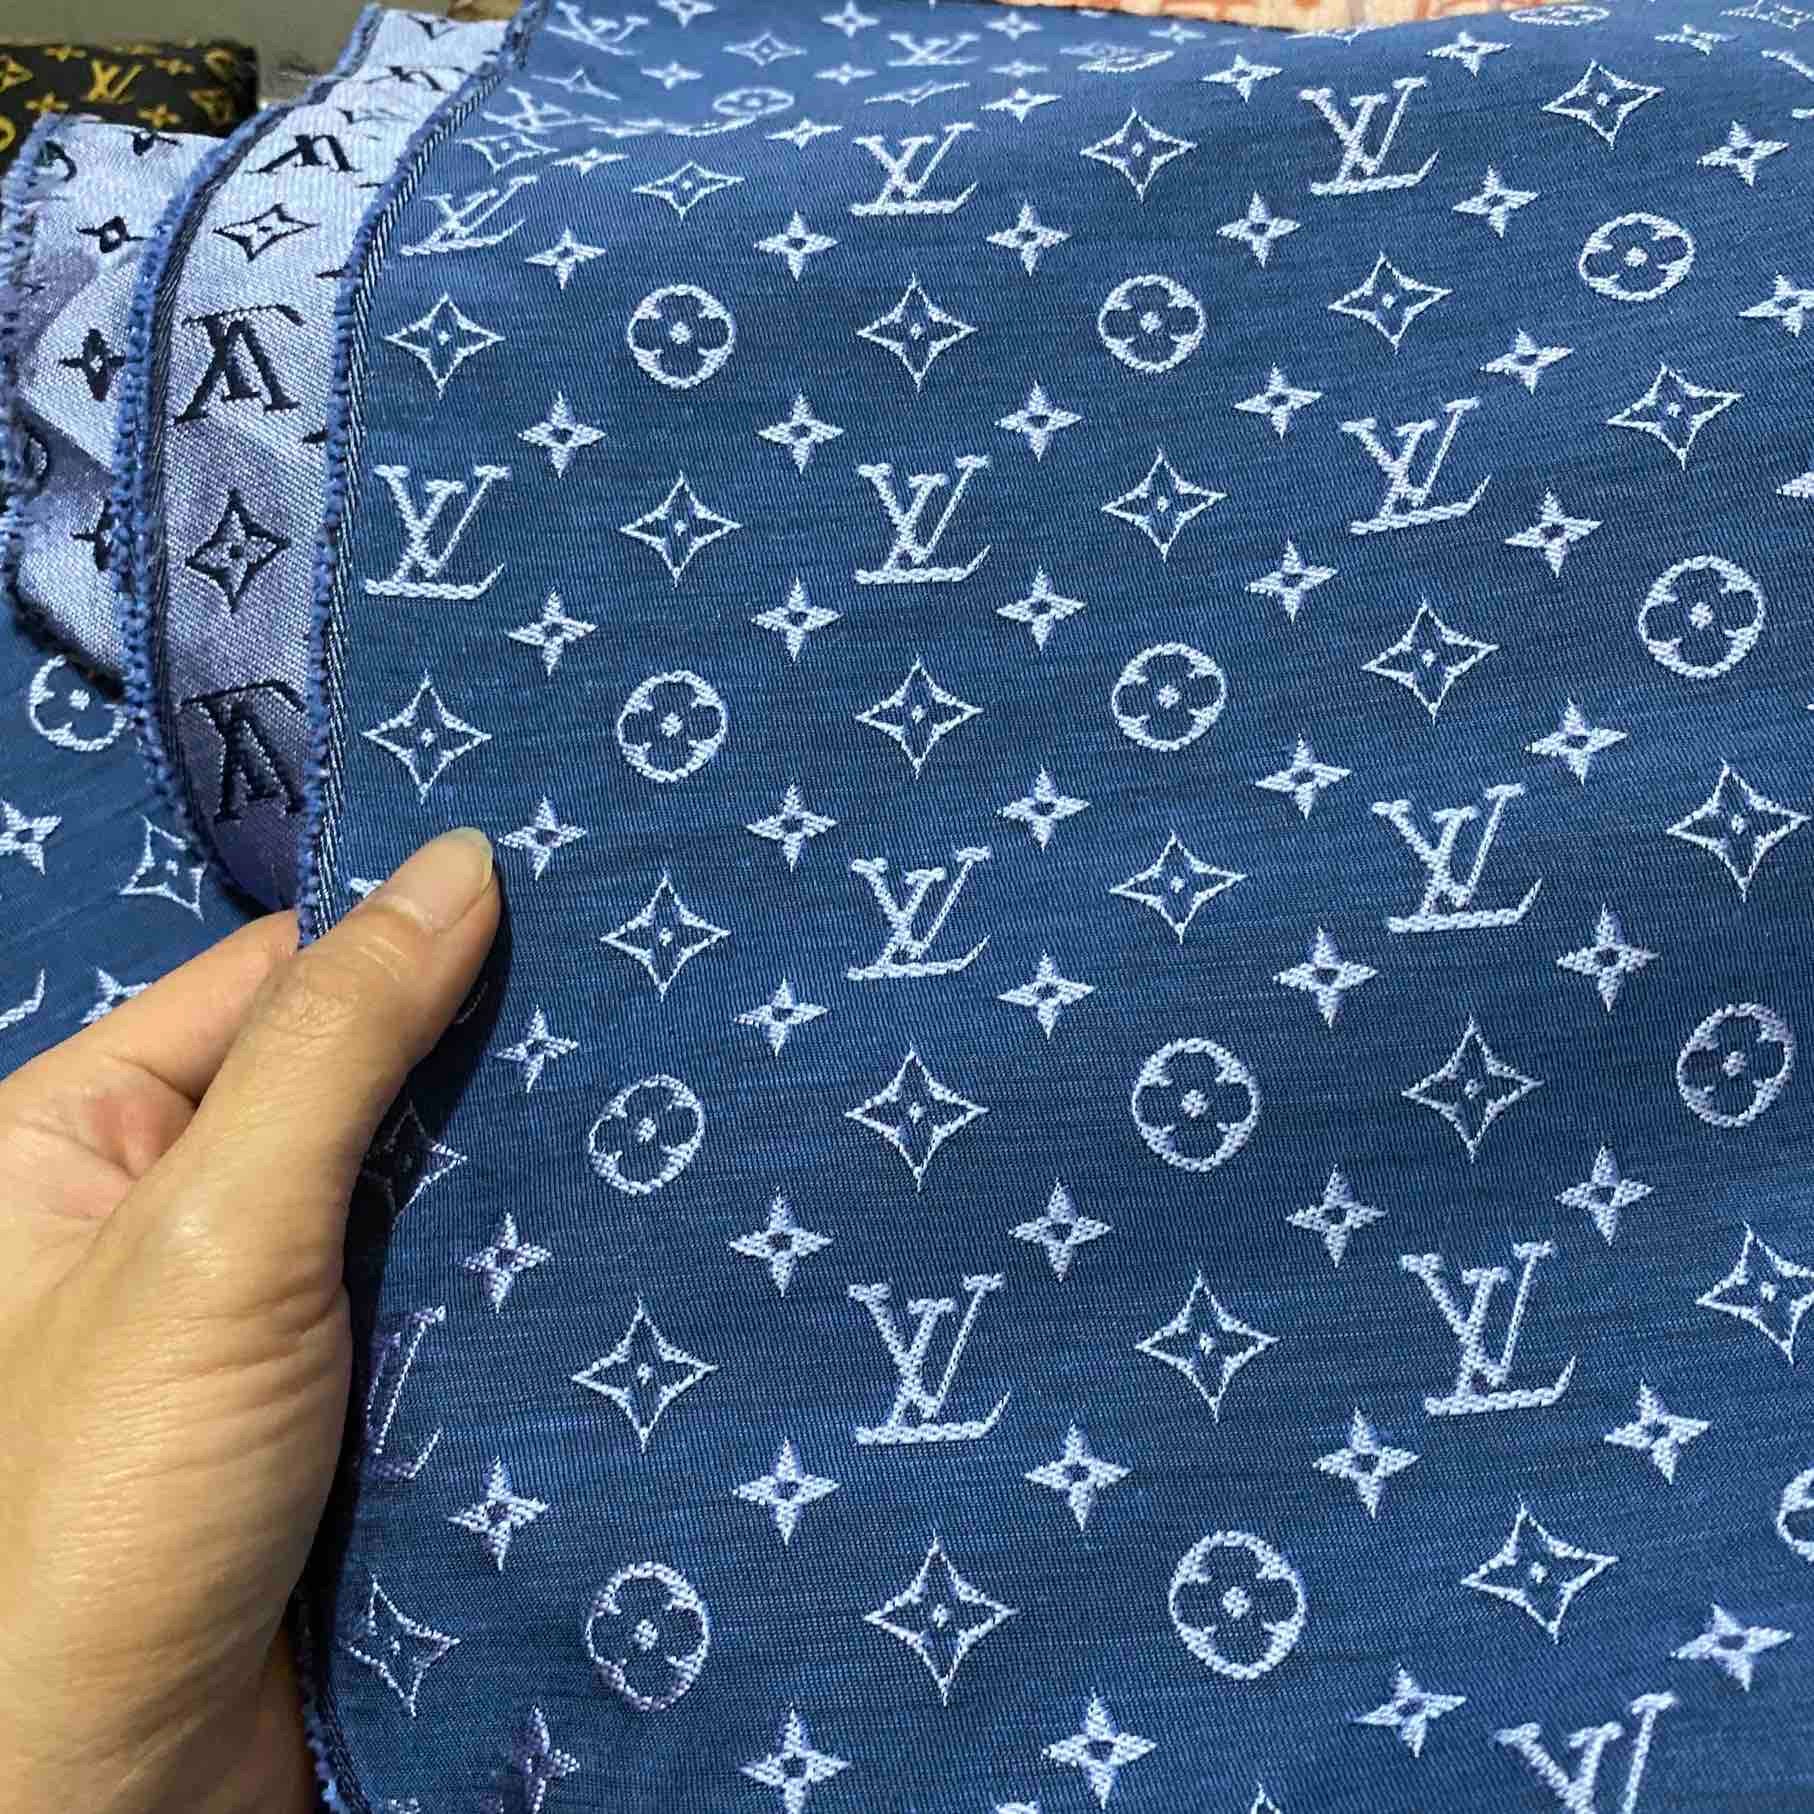 Lv Inspired Fabric By The Yard House